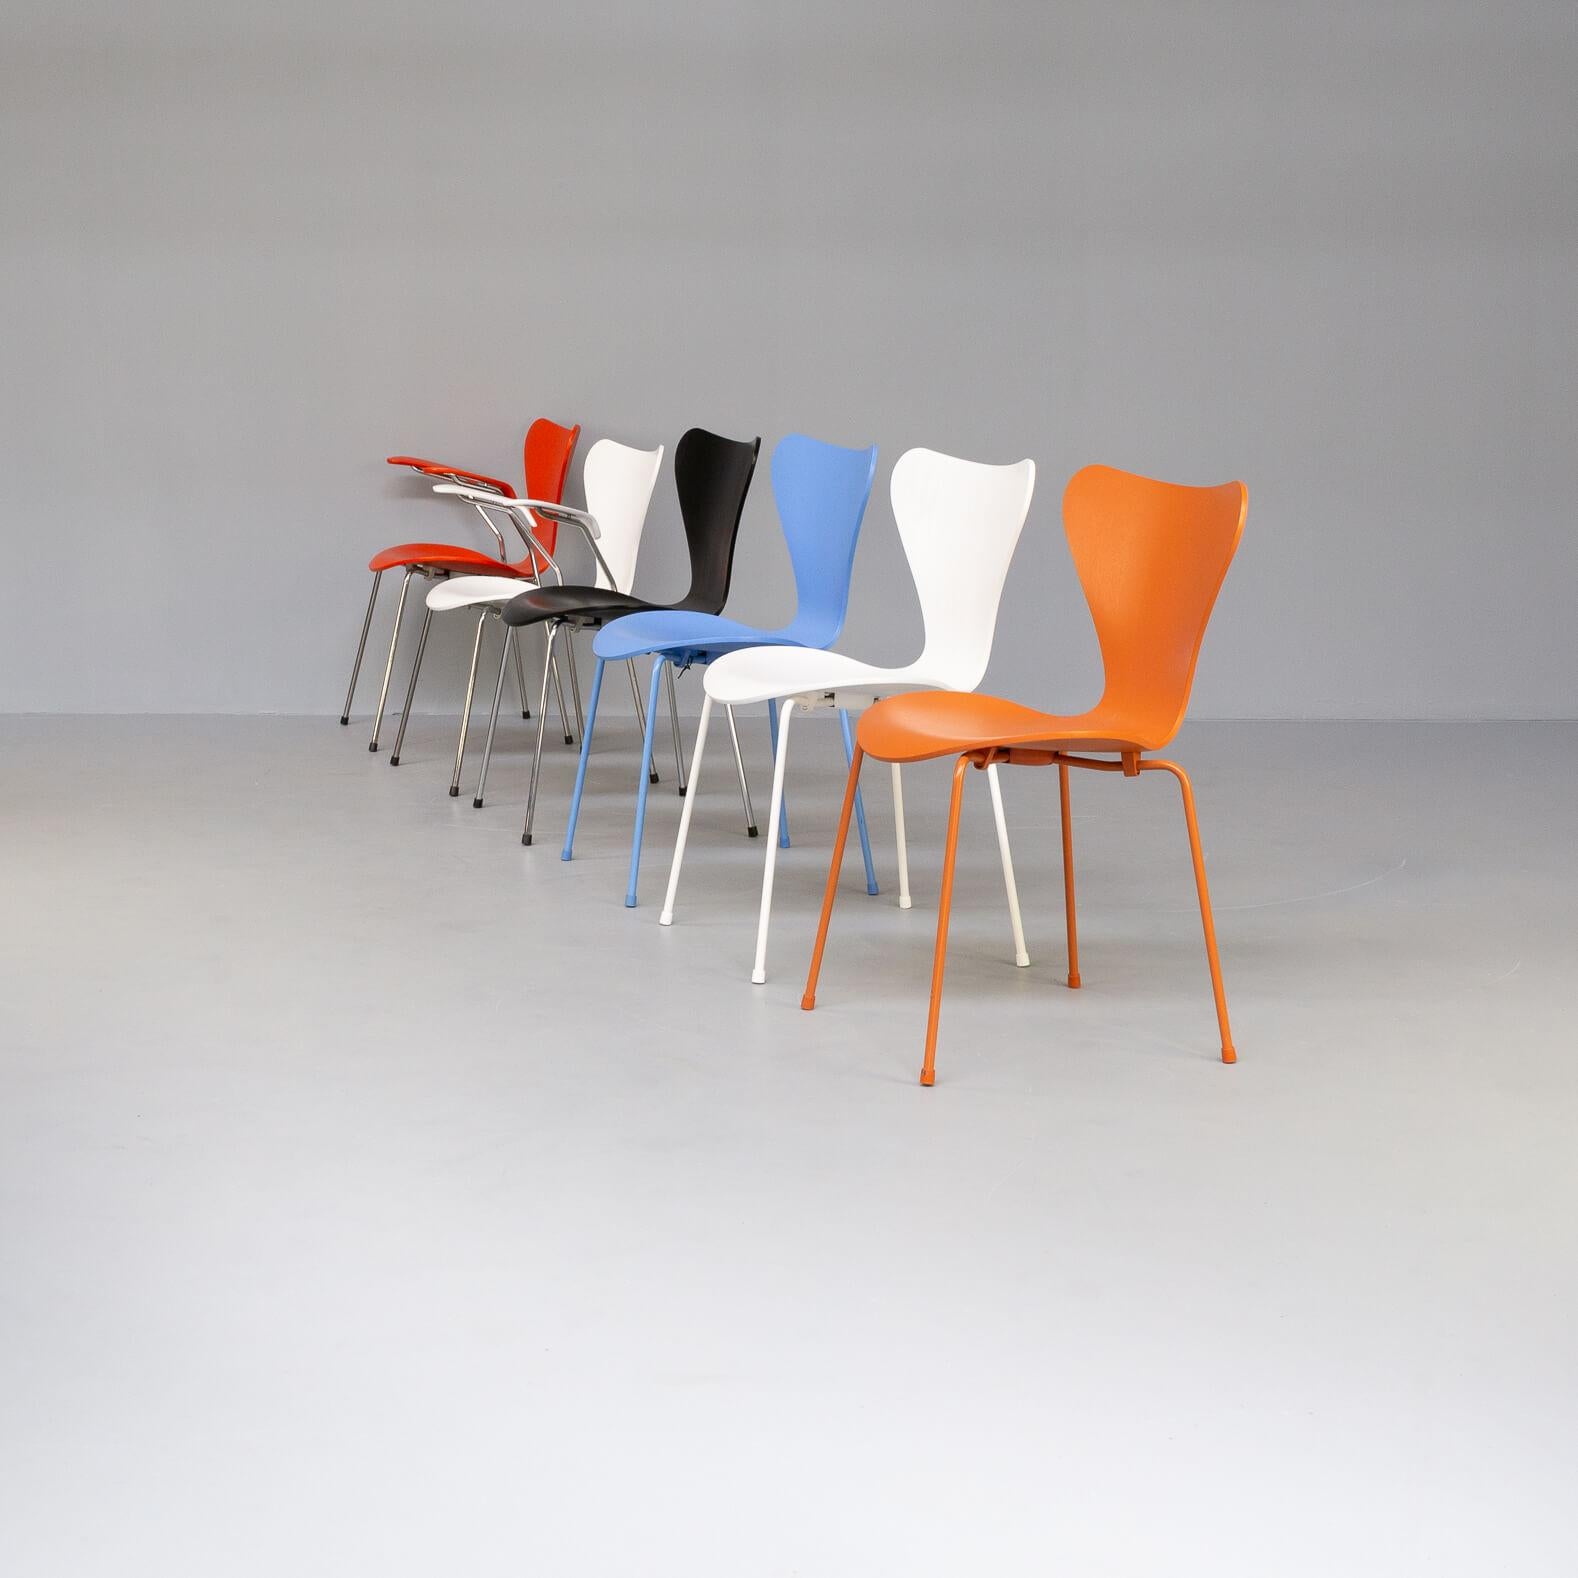 The model 3107 chair is a chair designed by Arne Jacobsen in 1955. It is a variation on the ant chair, also designed by Jacobsen.
The 3107 was, according to Jacobsen, inspired by a chair made by the husband and wife design team of Charles and Ray